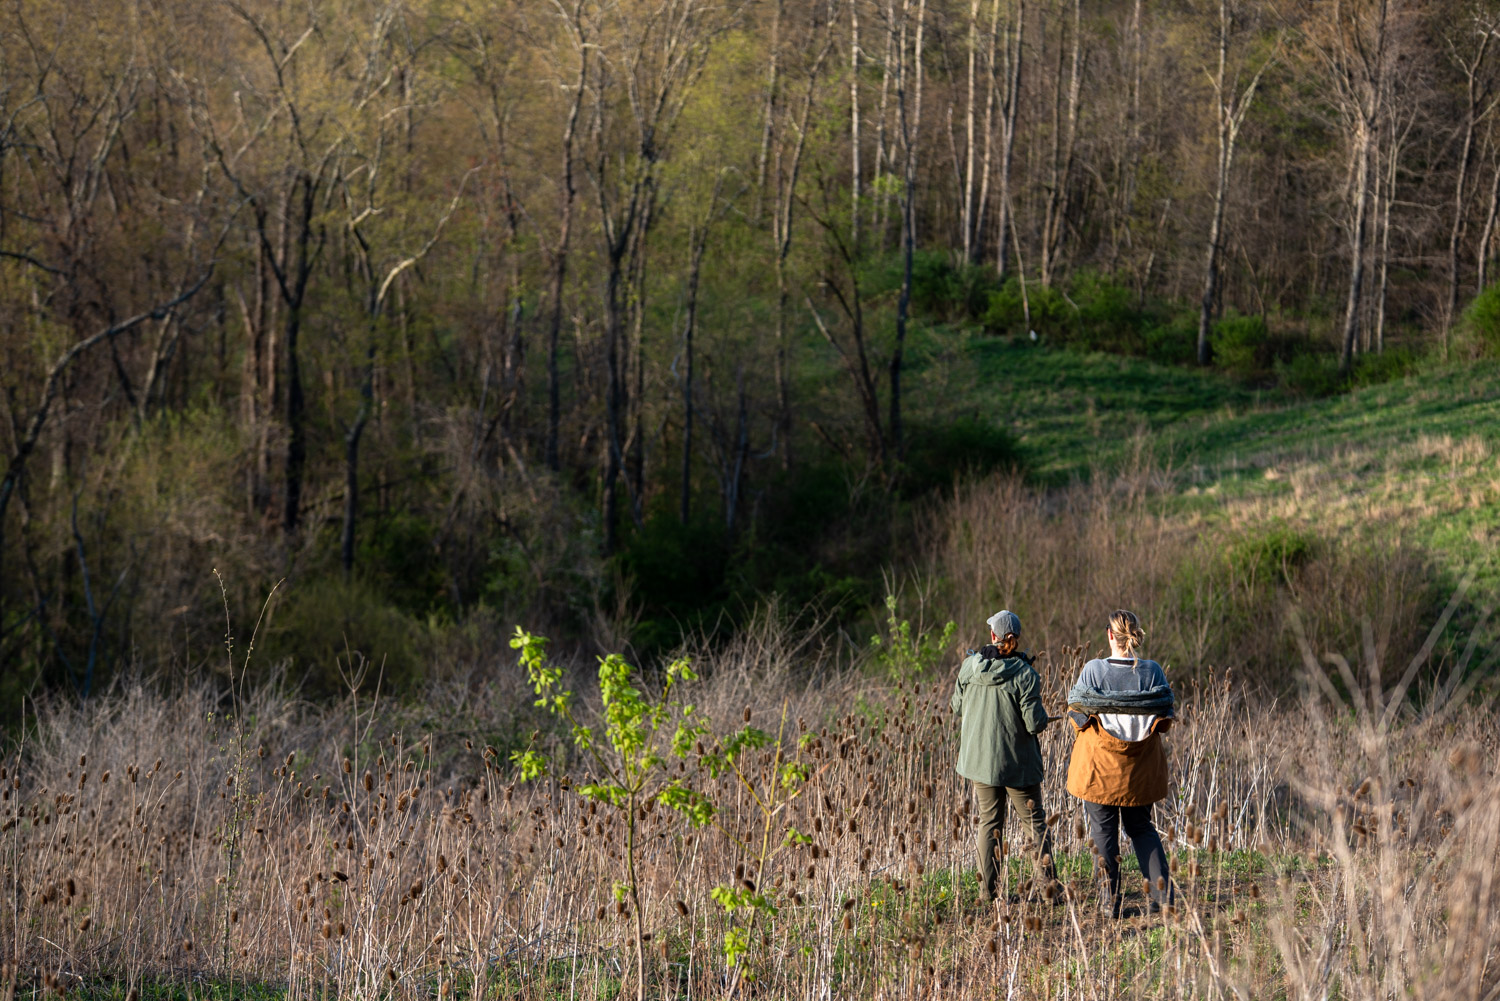 Two people standing on a grassy hillside in Spring at the Panhandle Greenway conservation project overlooking a scenic, wooded vista.